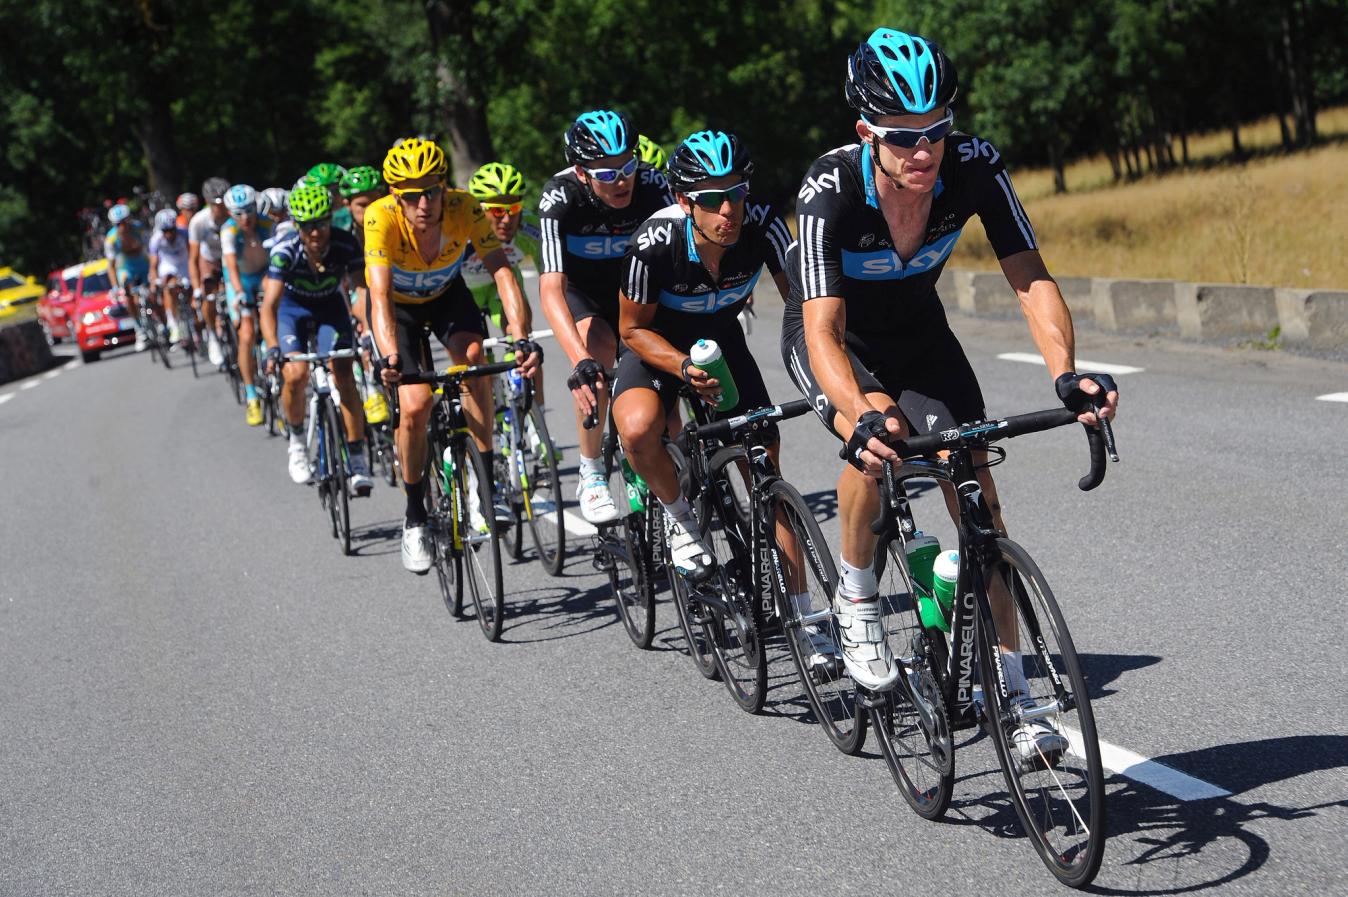 Richie Porte prepares to take over from Michael Rogers as Team Sky string out the peloton in the 2012 Tour de France